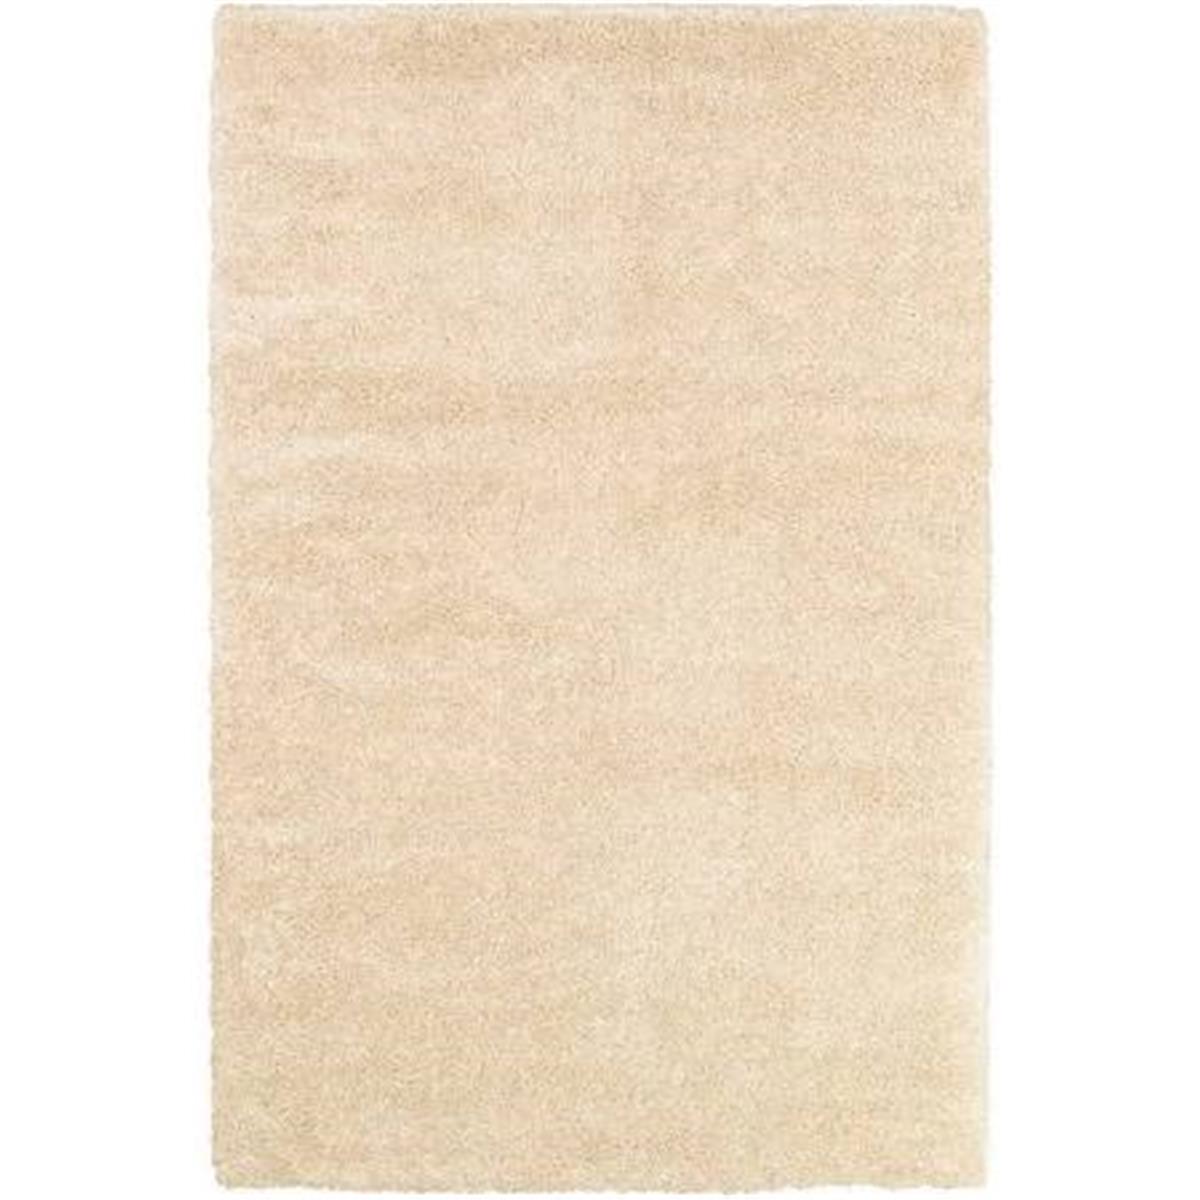 43110100092129t 9 Ft. 2 In. X 12 Ft. 6 In. Bromley Breckenridge Rug - Snow